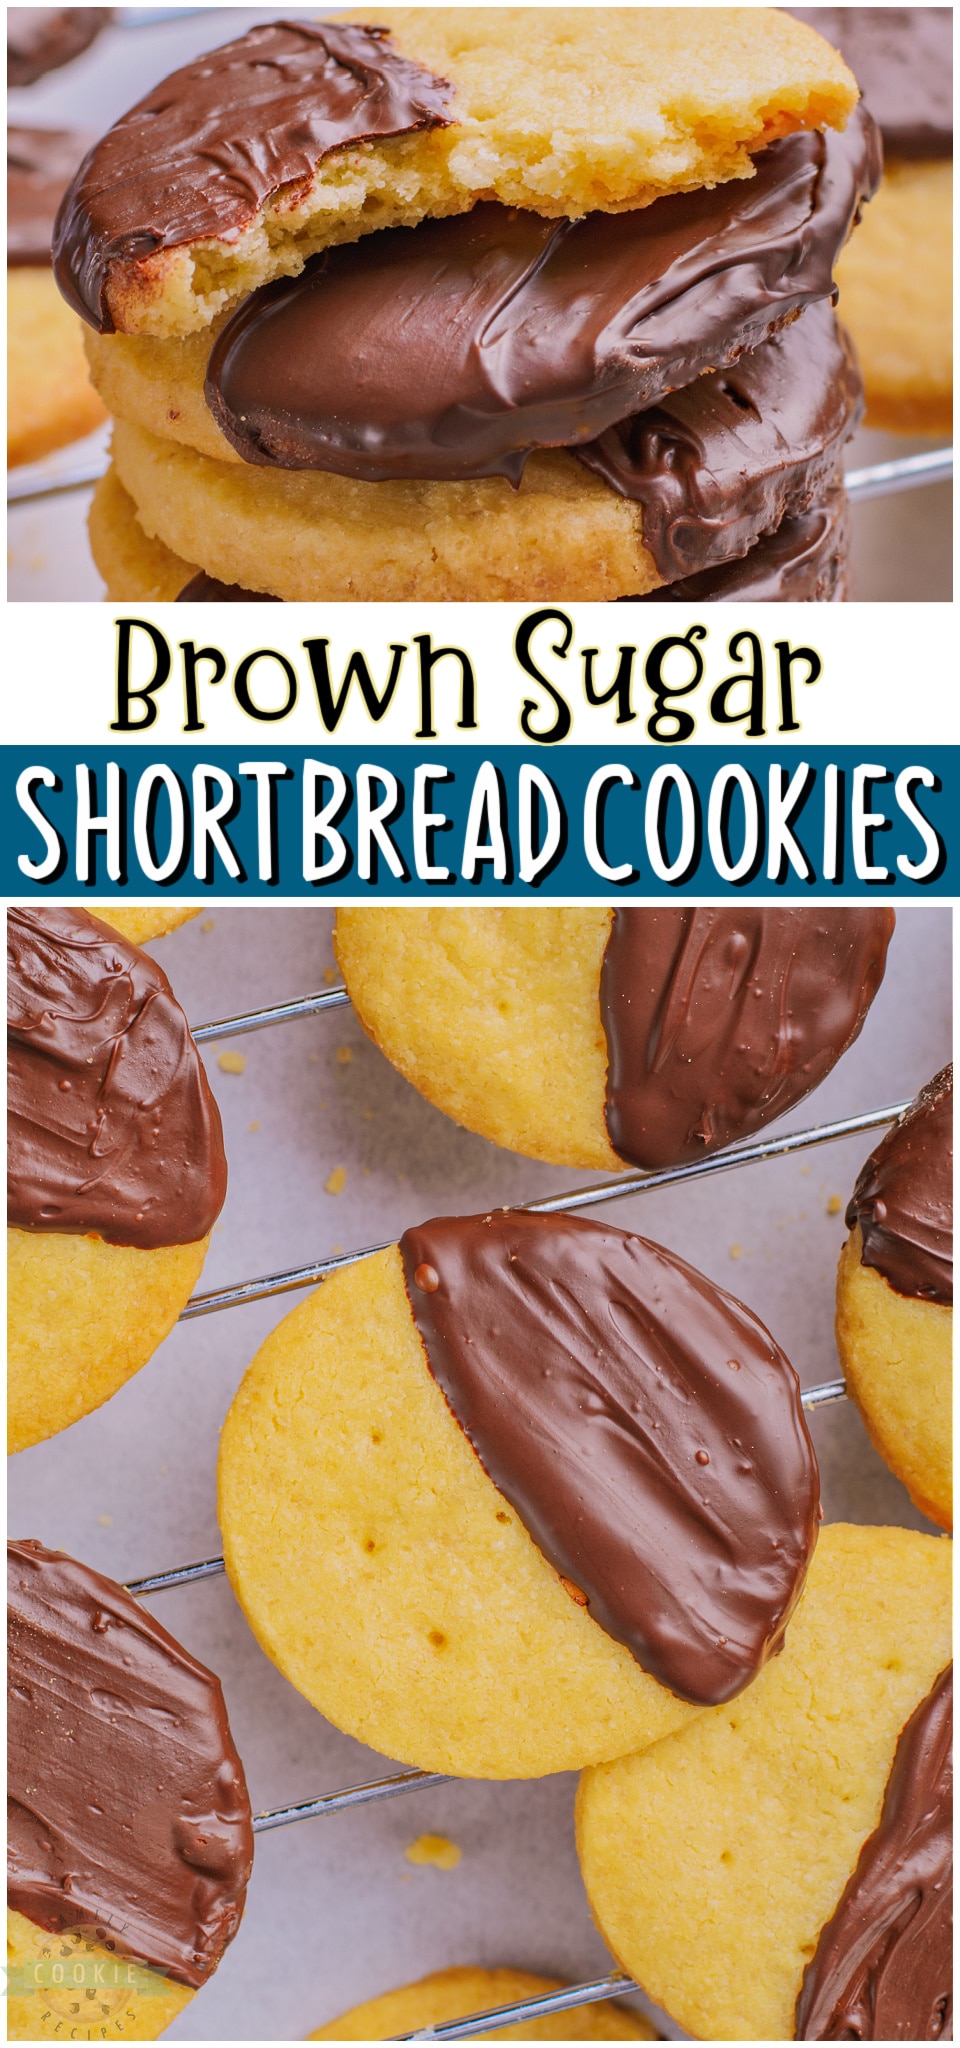 Brown Sugar Shortbread cookies are tender, crisp shortbread made with brown sugar for great flavor! Baked, then dipped in chocolate for a perfect shortbread cookie. #shortbread #cookies #baking #butter #easyrecipe from FAMILY COOKIE RECIPES via @buttergirls